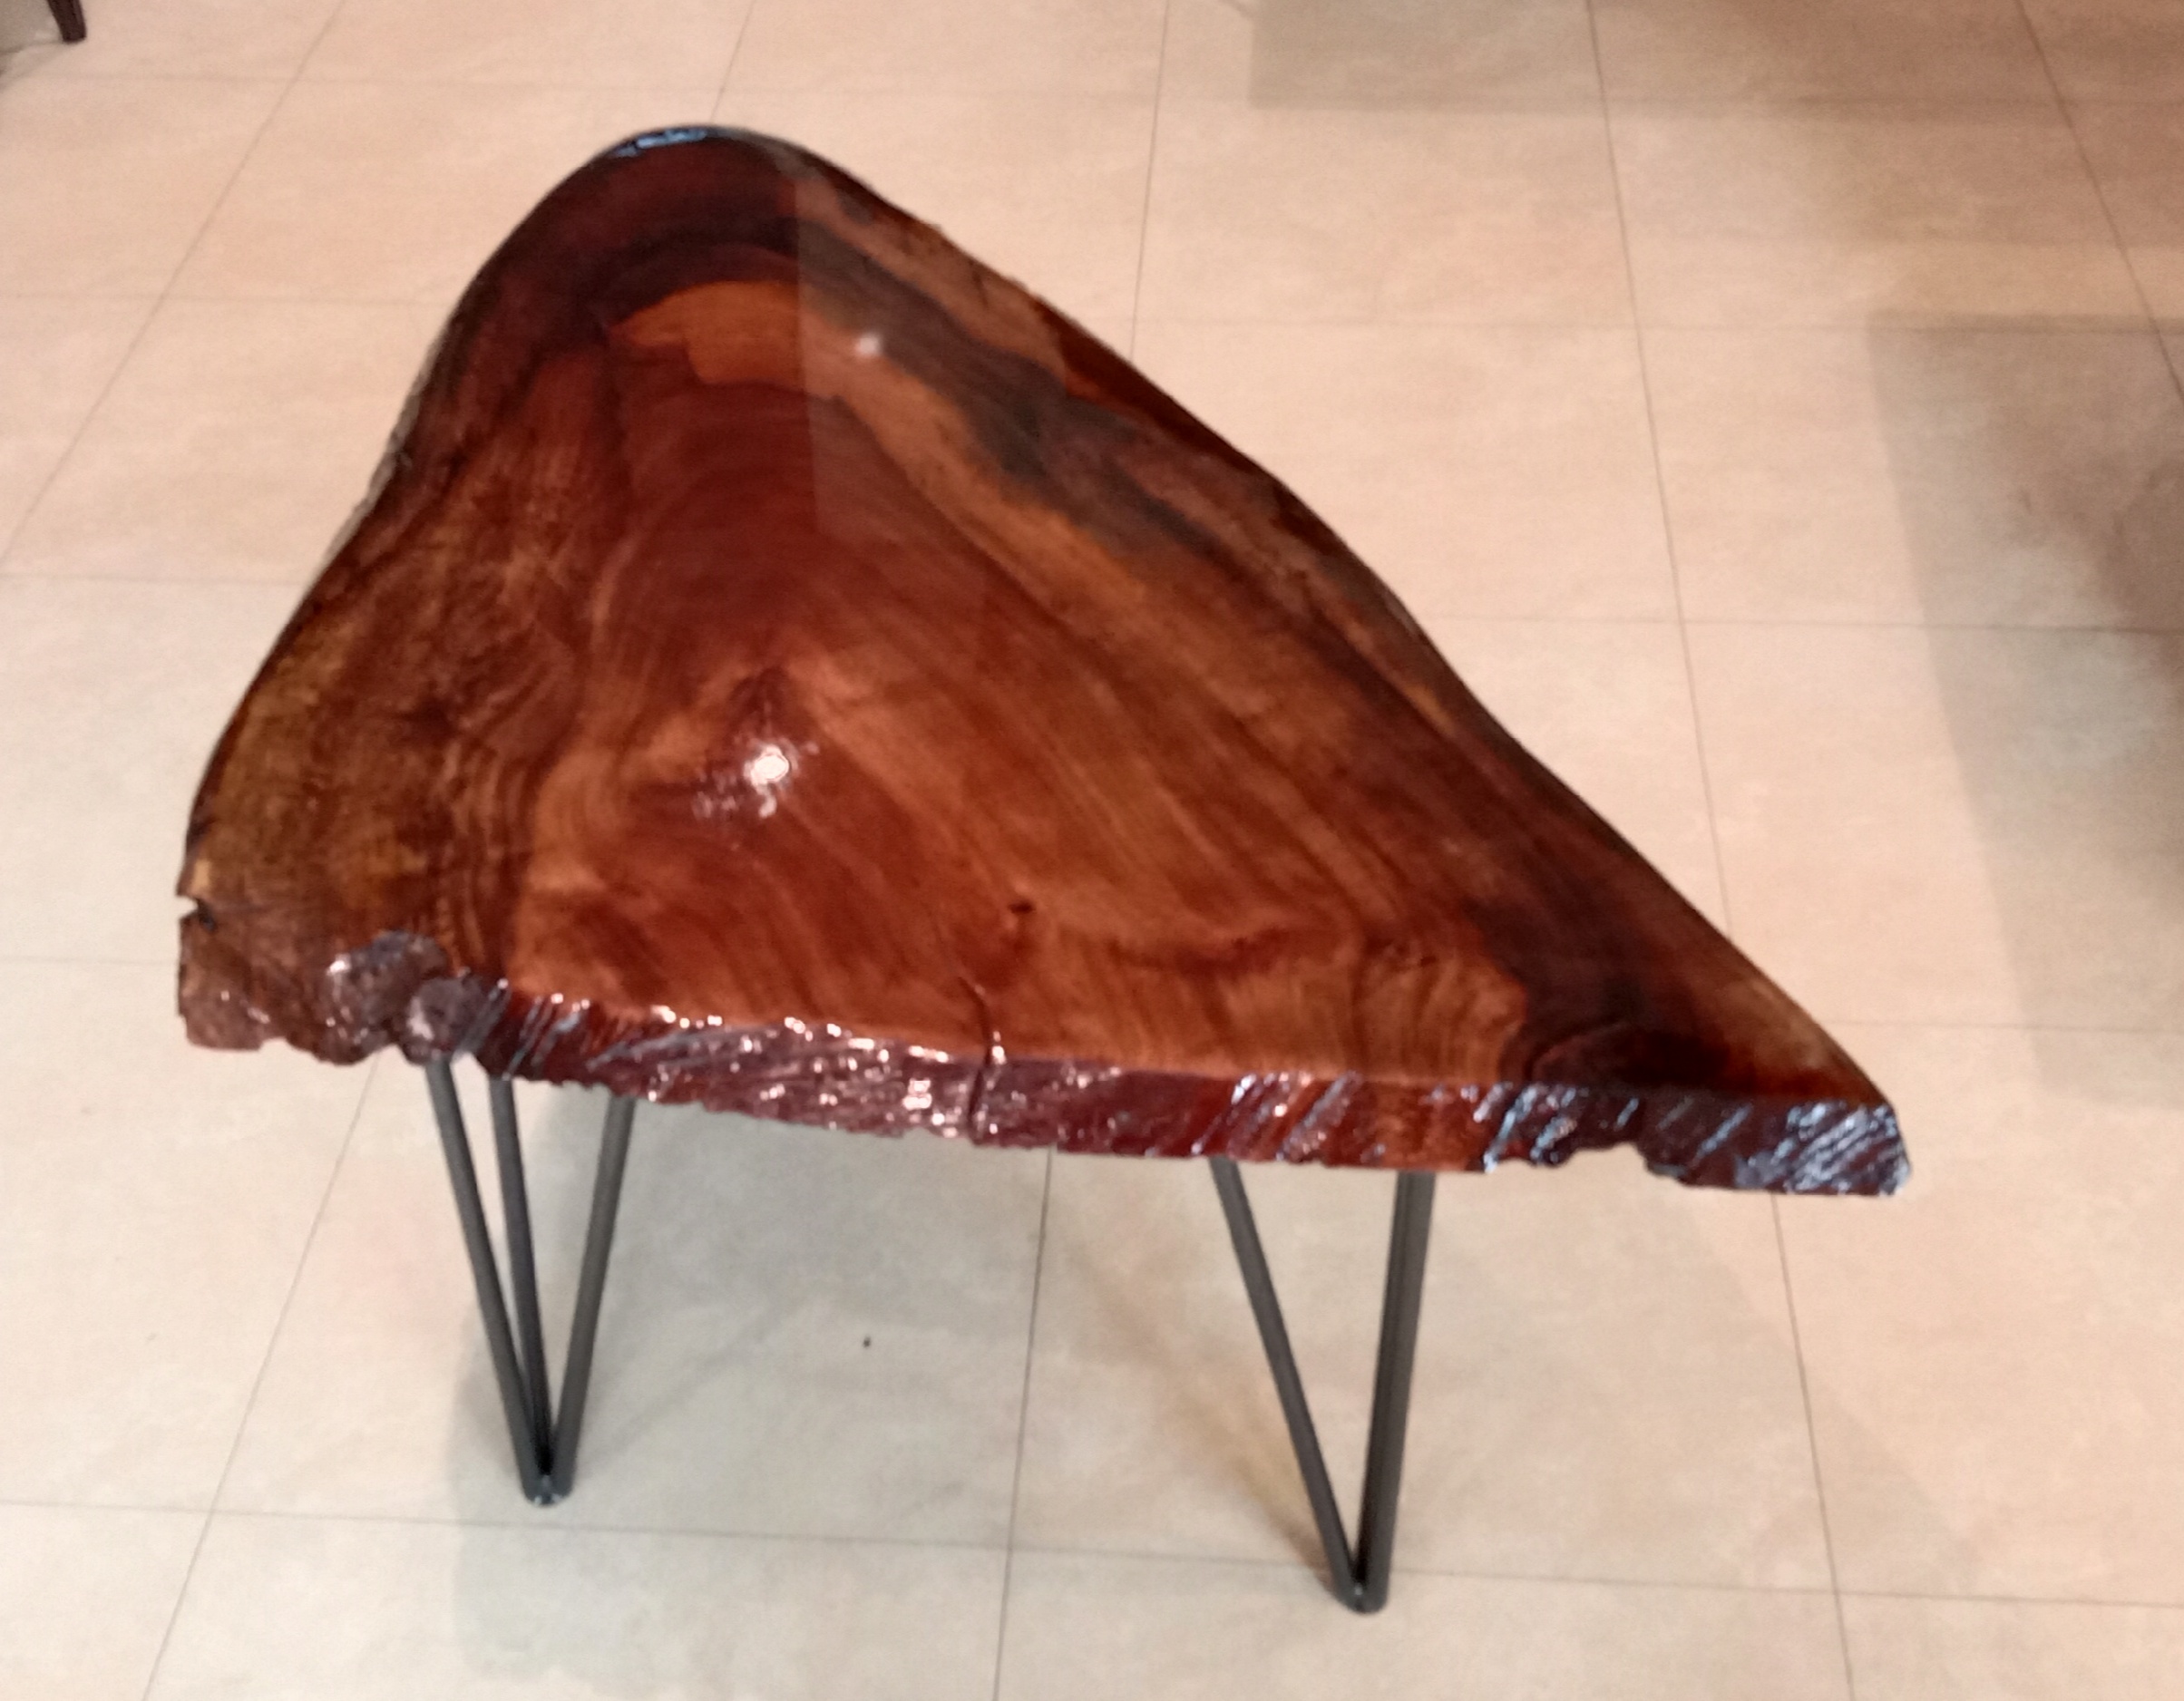 LIVE EDGE TABLE 42"x24.5" 30- 40mm (Mango wood) (TABLE PRICE ONLY)